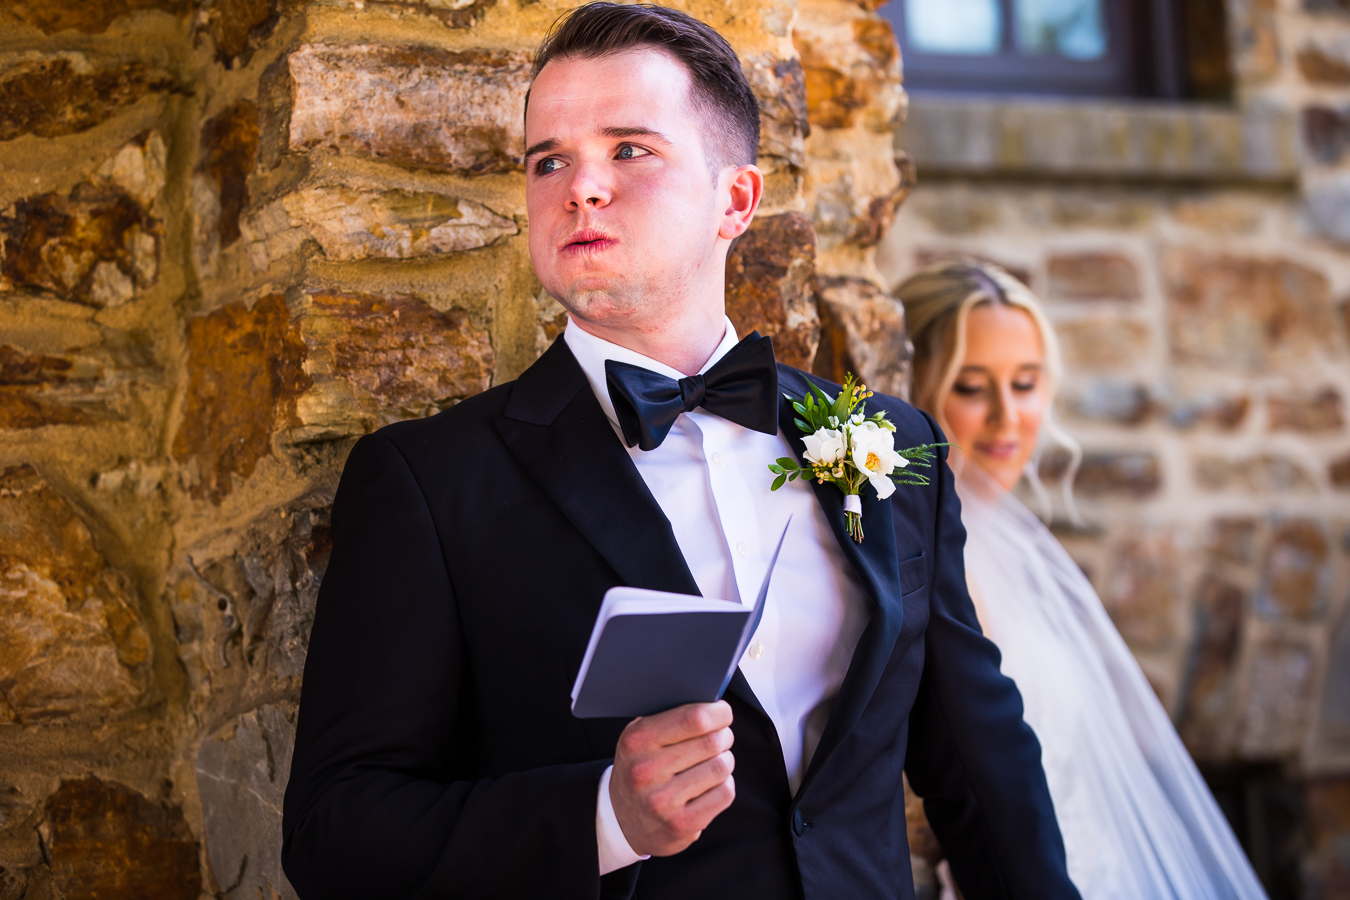 authentic wedding photographer, lisa rhinehart, captures this raw emotion from the groom as he holds his brides hand and reads their vows before their wedding ceremony 